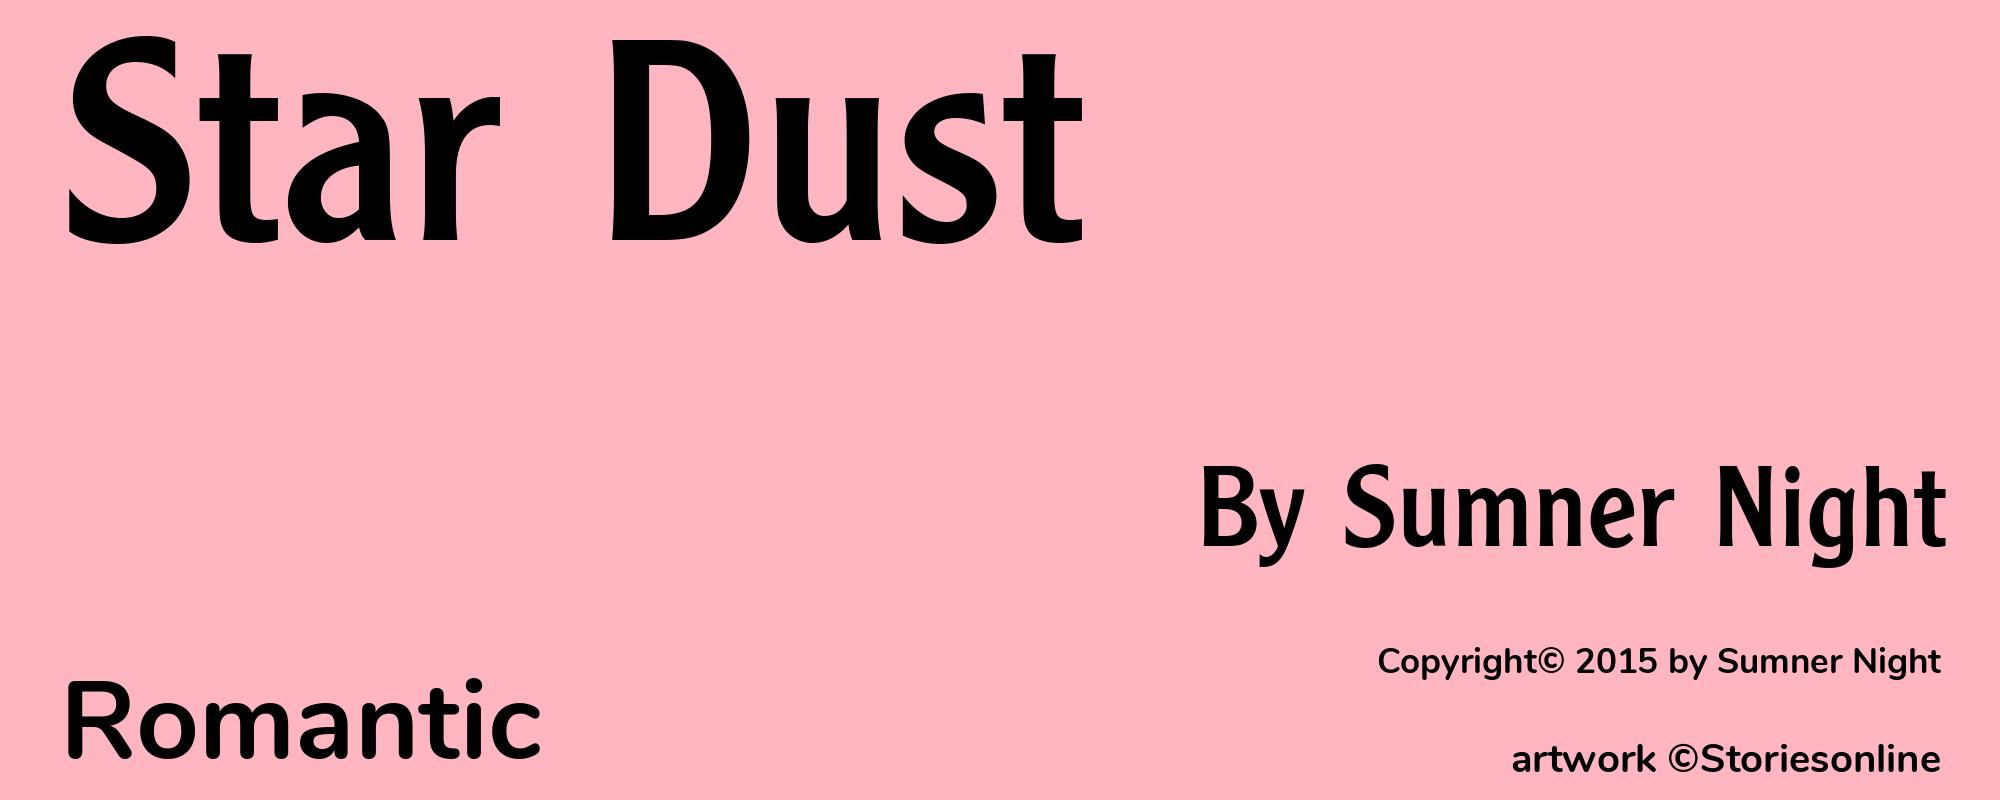 Star Dust - Cover